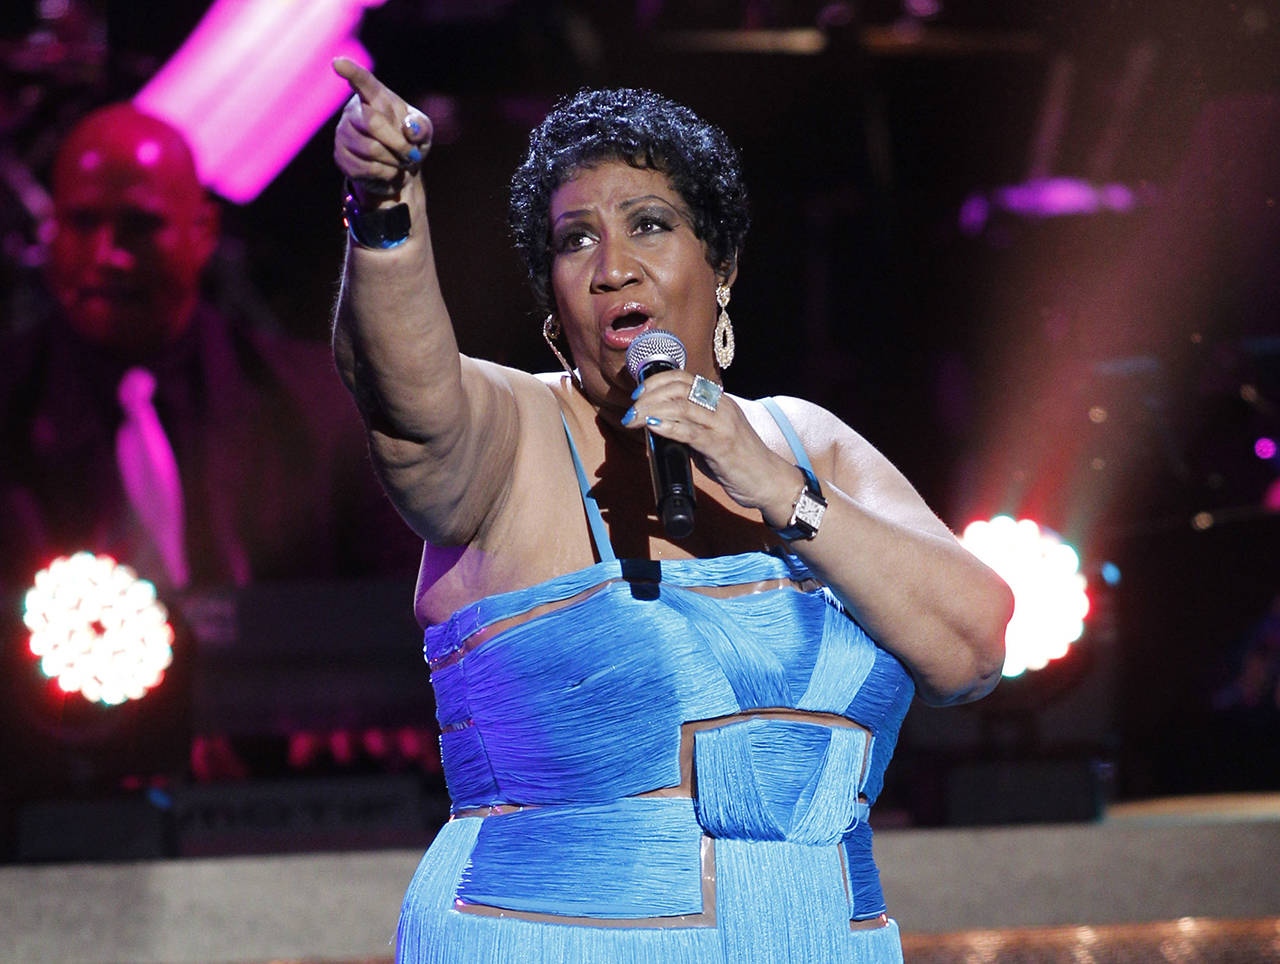 The 'Queen of Soul,' Aretha Franklin, has died at 76